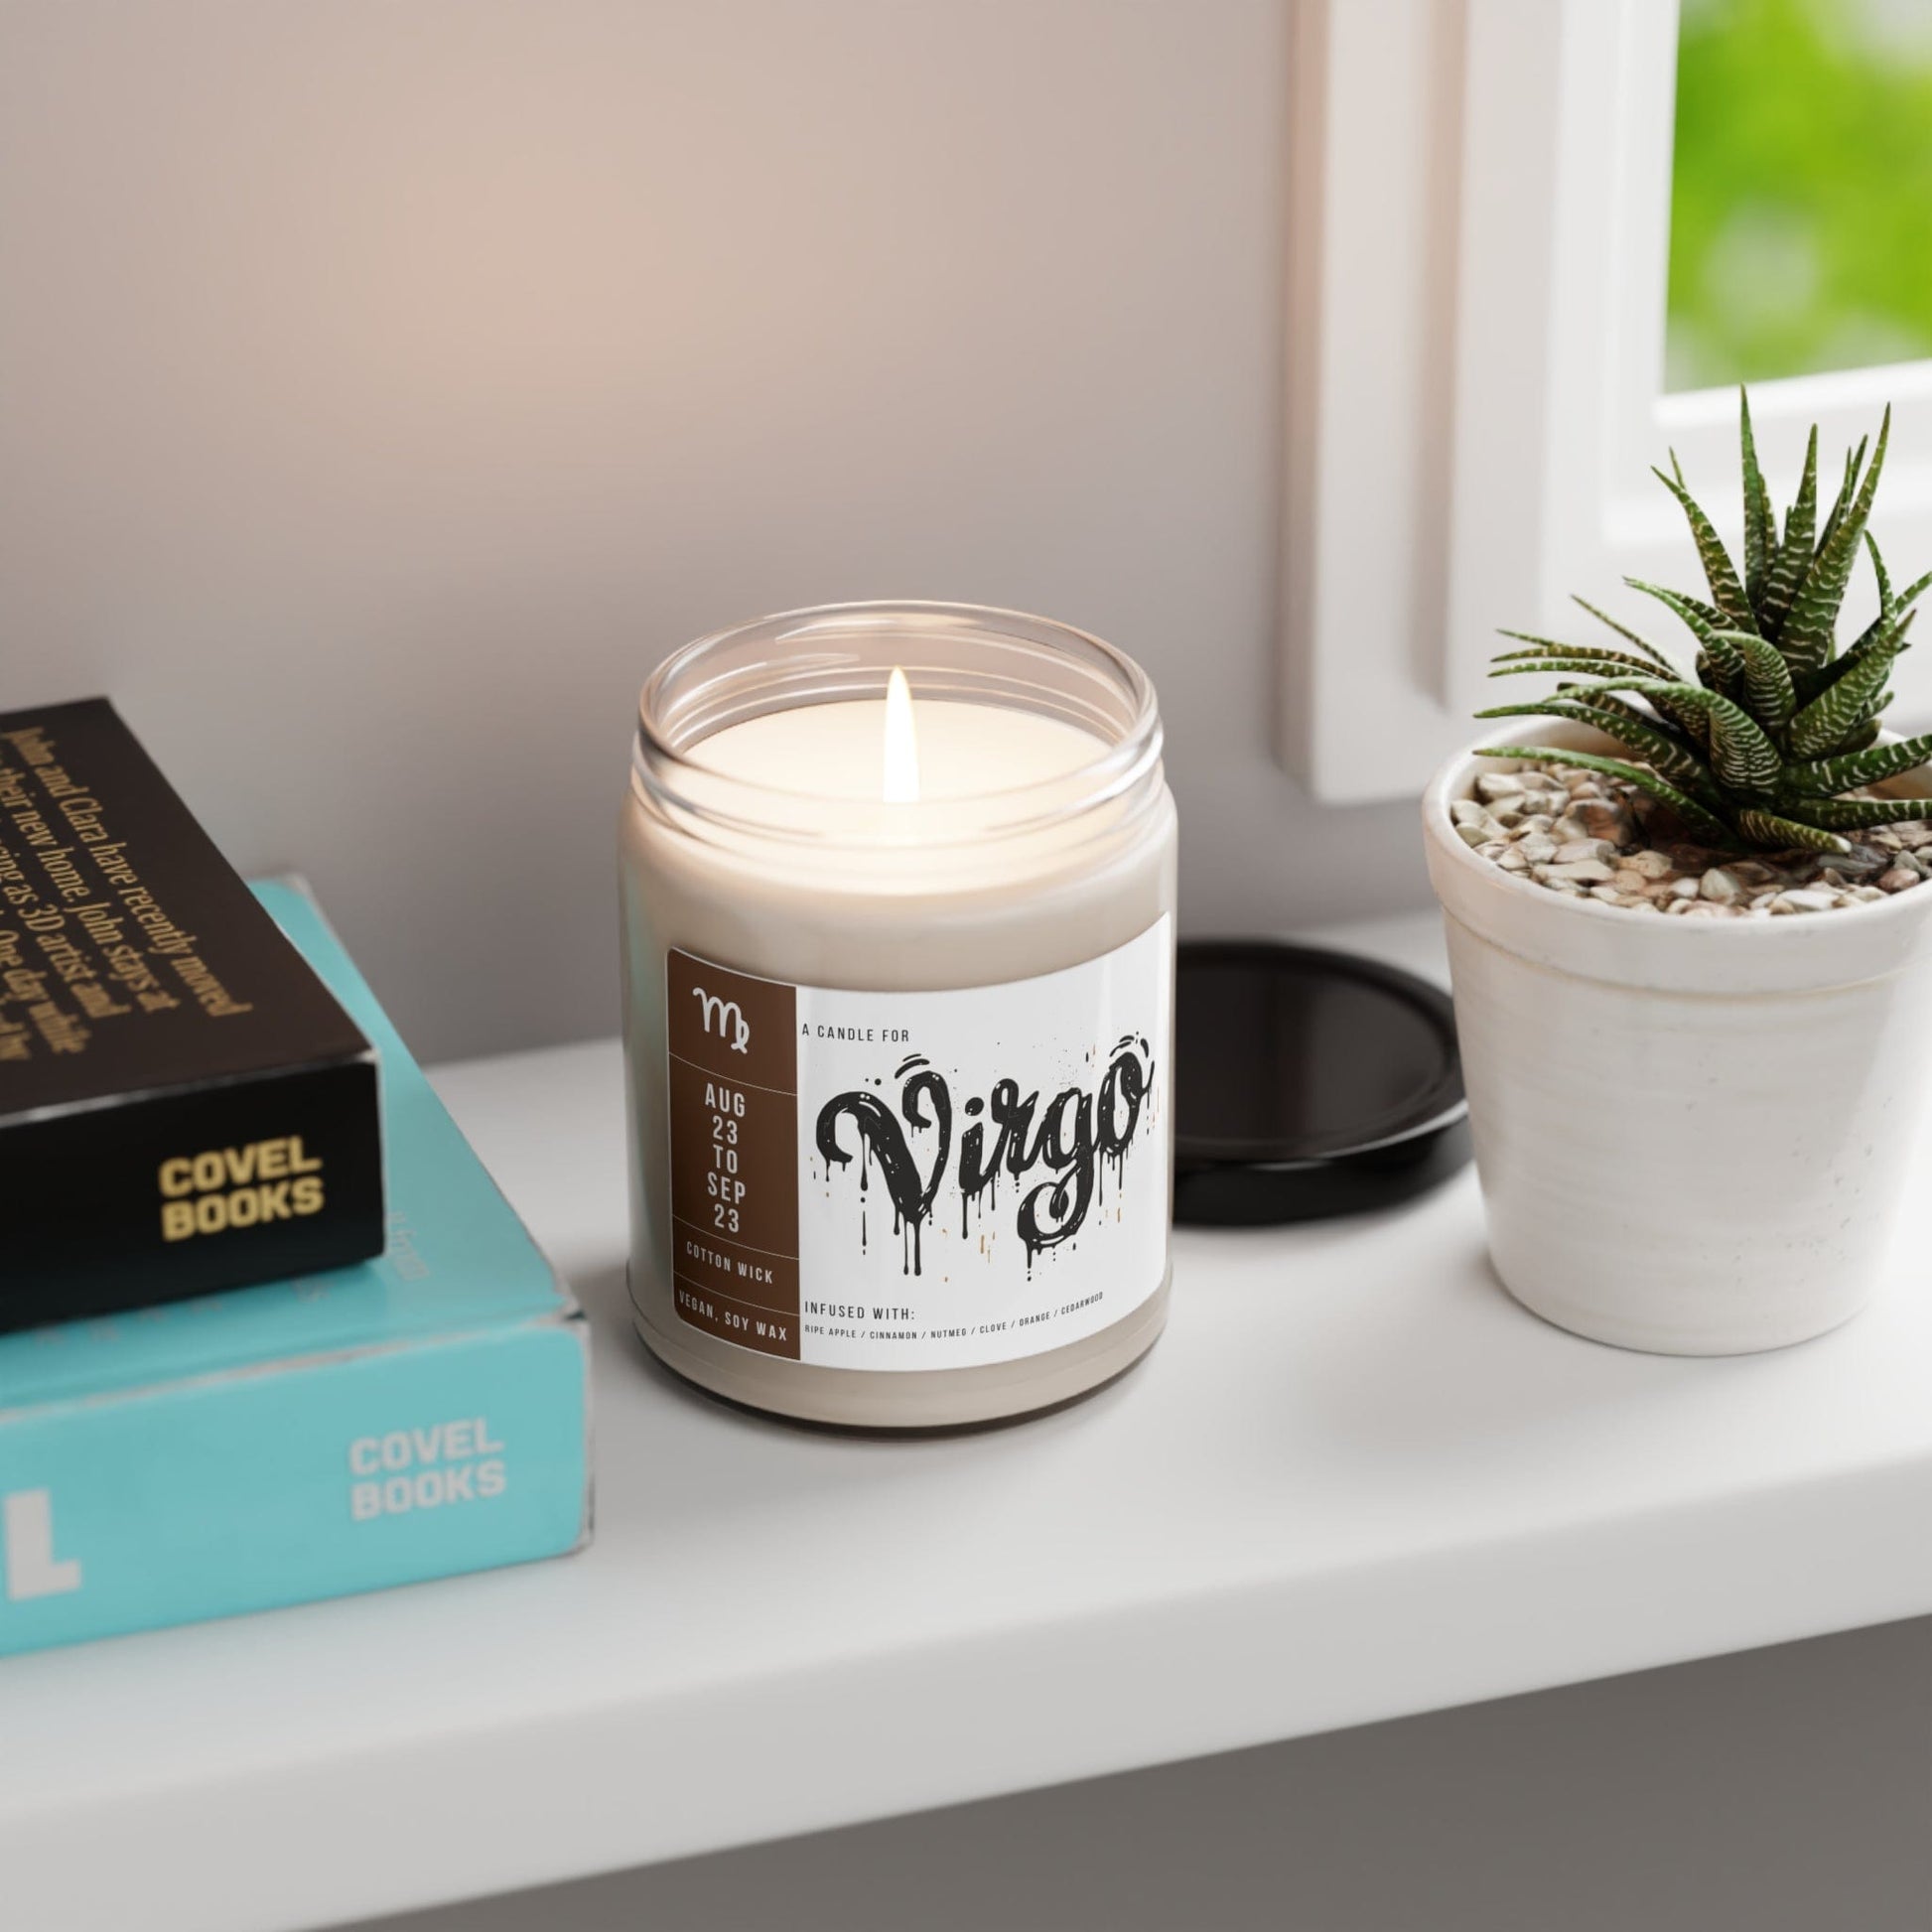 Home Decor Virgo Zodiac Scented Soy Candle Collection – Whisper of the Maiden